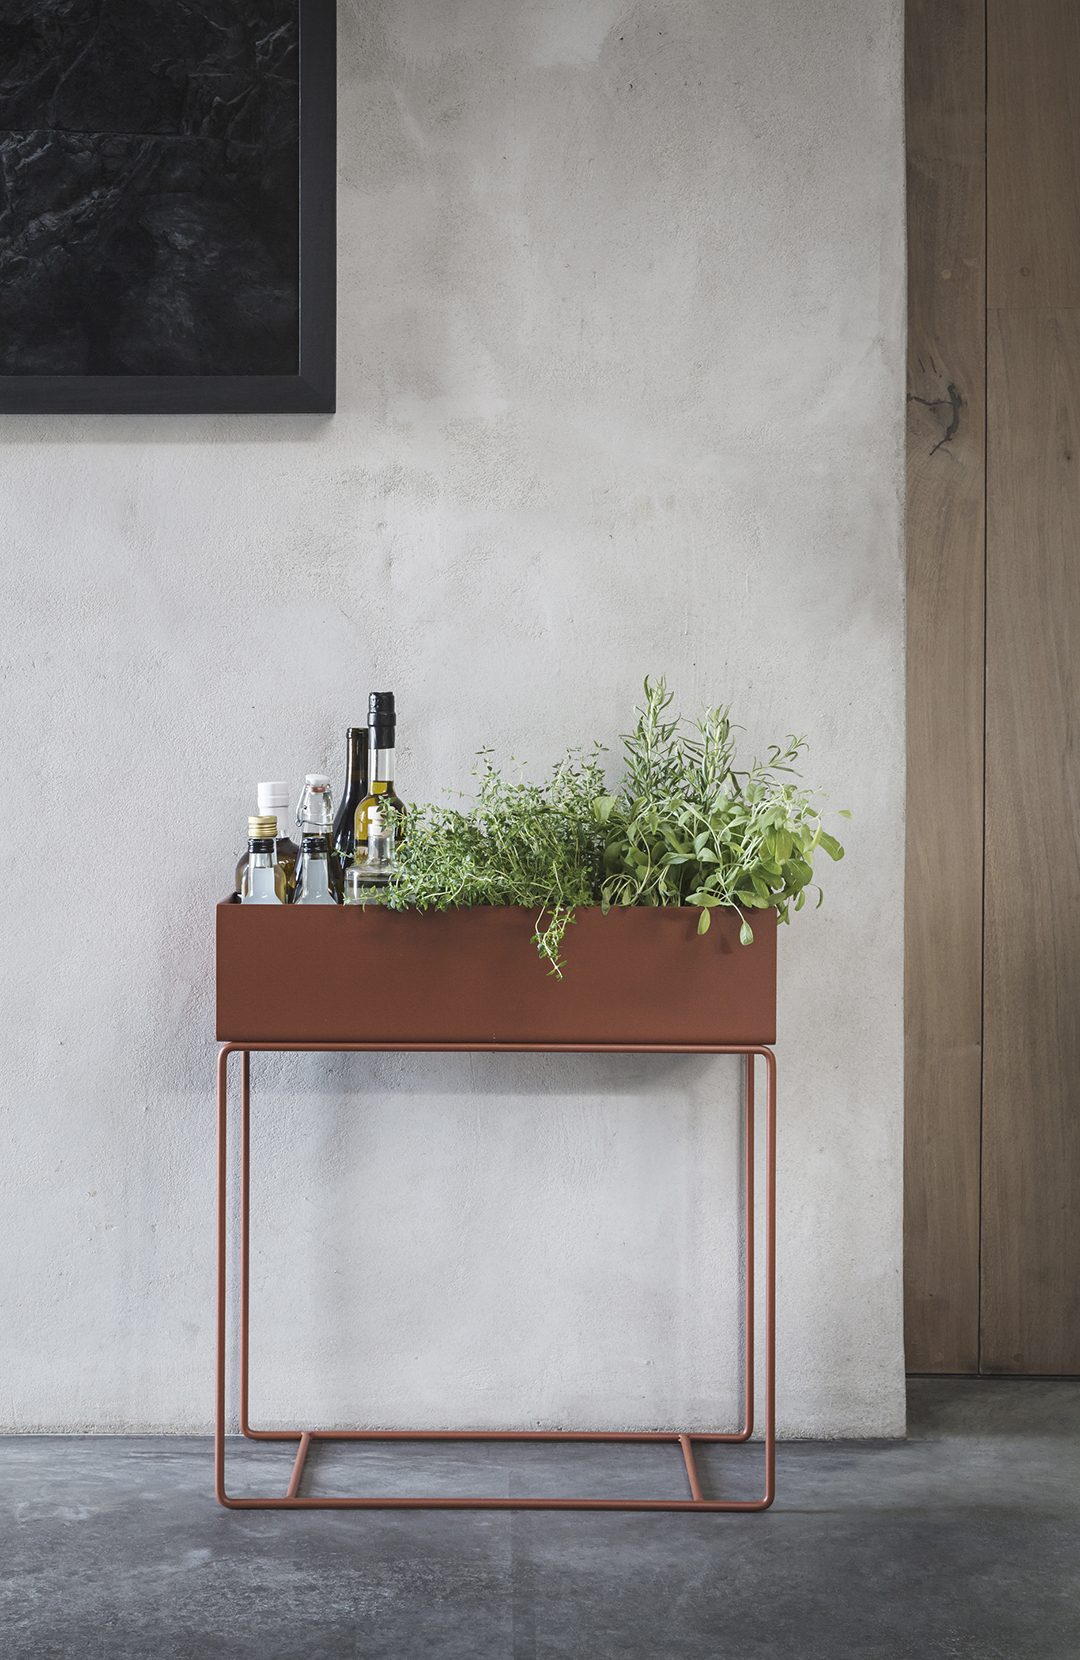 20 of best plant pots and planters - image: Ferm Living - cate st